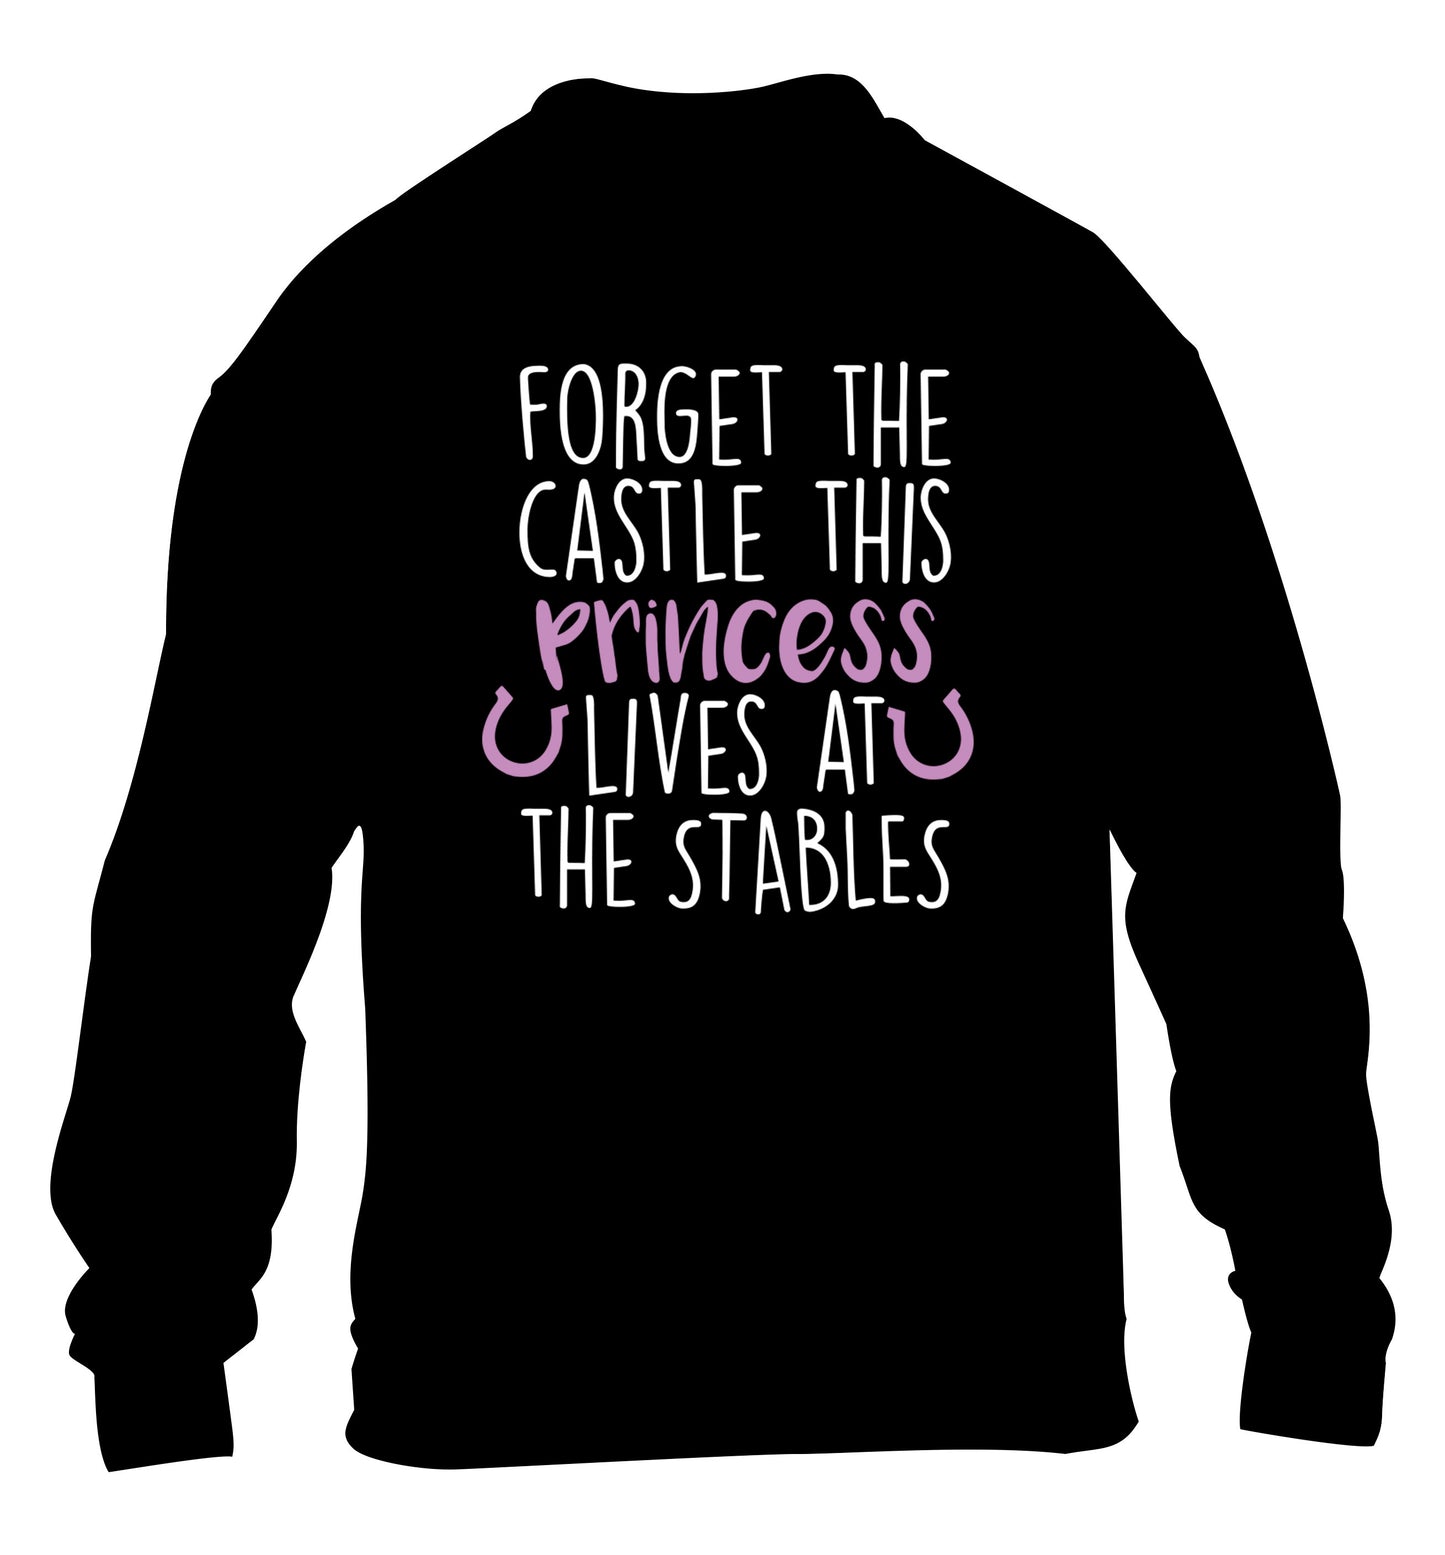 Forget the castle this princess lives at the stables children's black sweater 12-14 Years